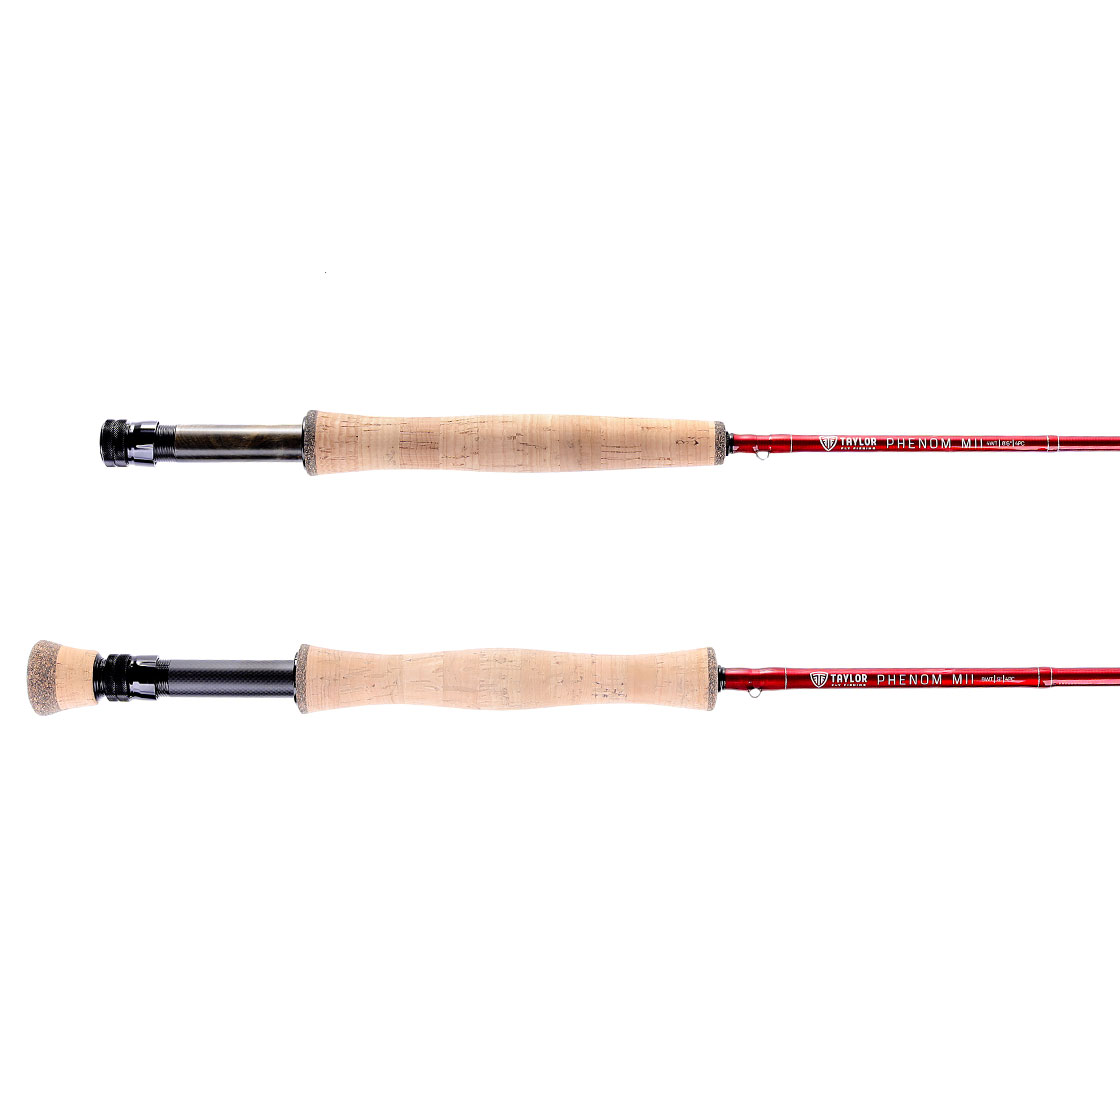 The beautiful Taylor Phenom and Array V2 fly fishing rod and reel